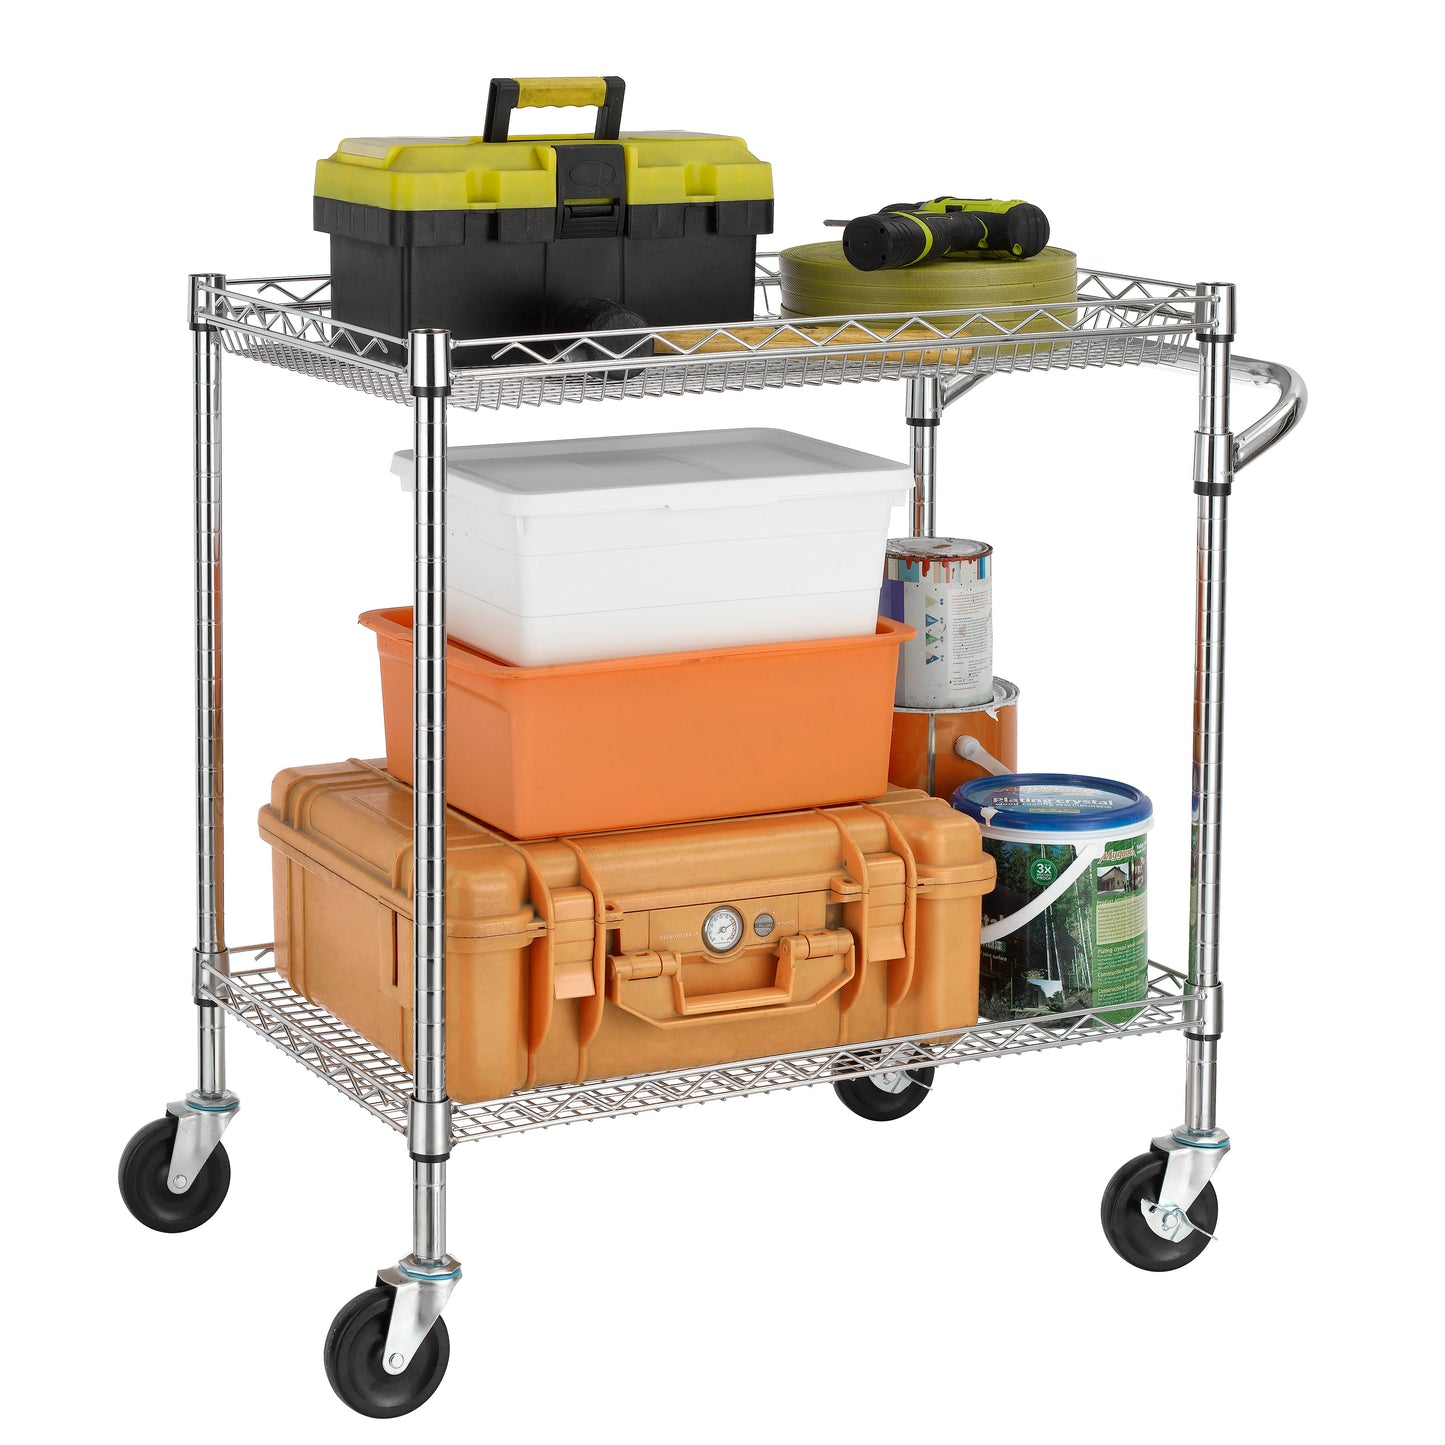 Finnhomy 3 Tier Heavy Duty Commercial Grade Utility Cart with Wood Top, Wire Rolling Cart with Handle Bar, Steel Service Cart with Wheels, Utility Shelf Food Storage Trolley, NSF Listed